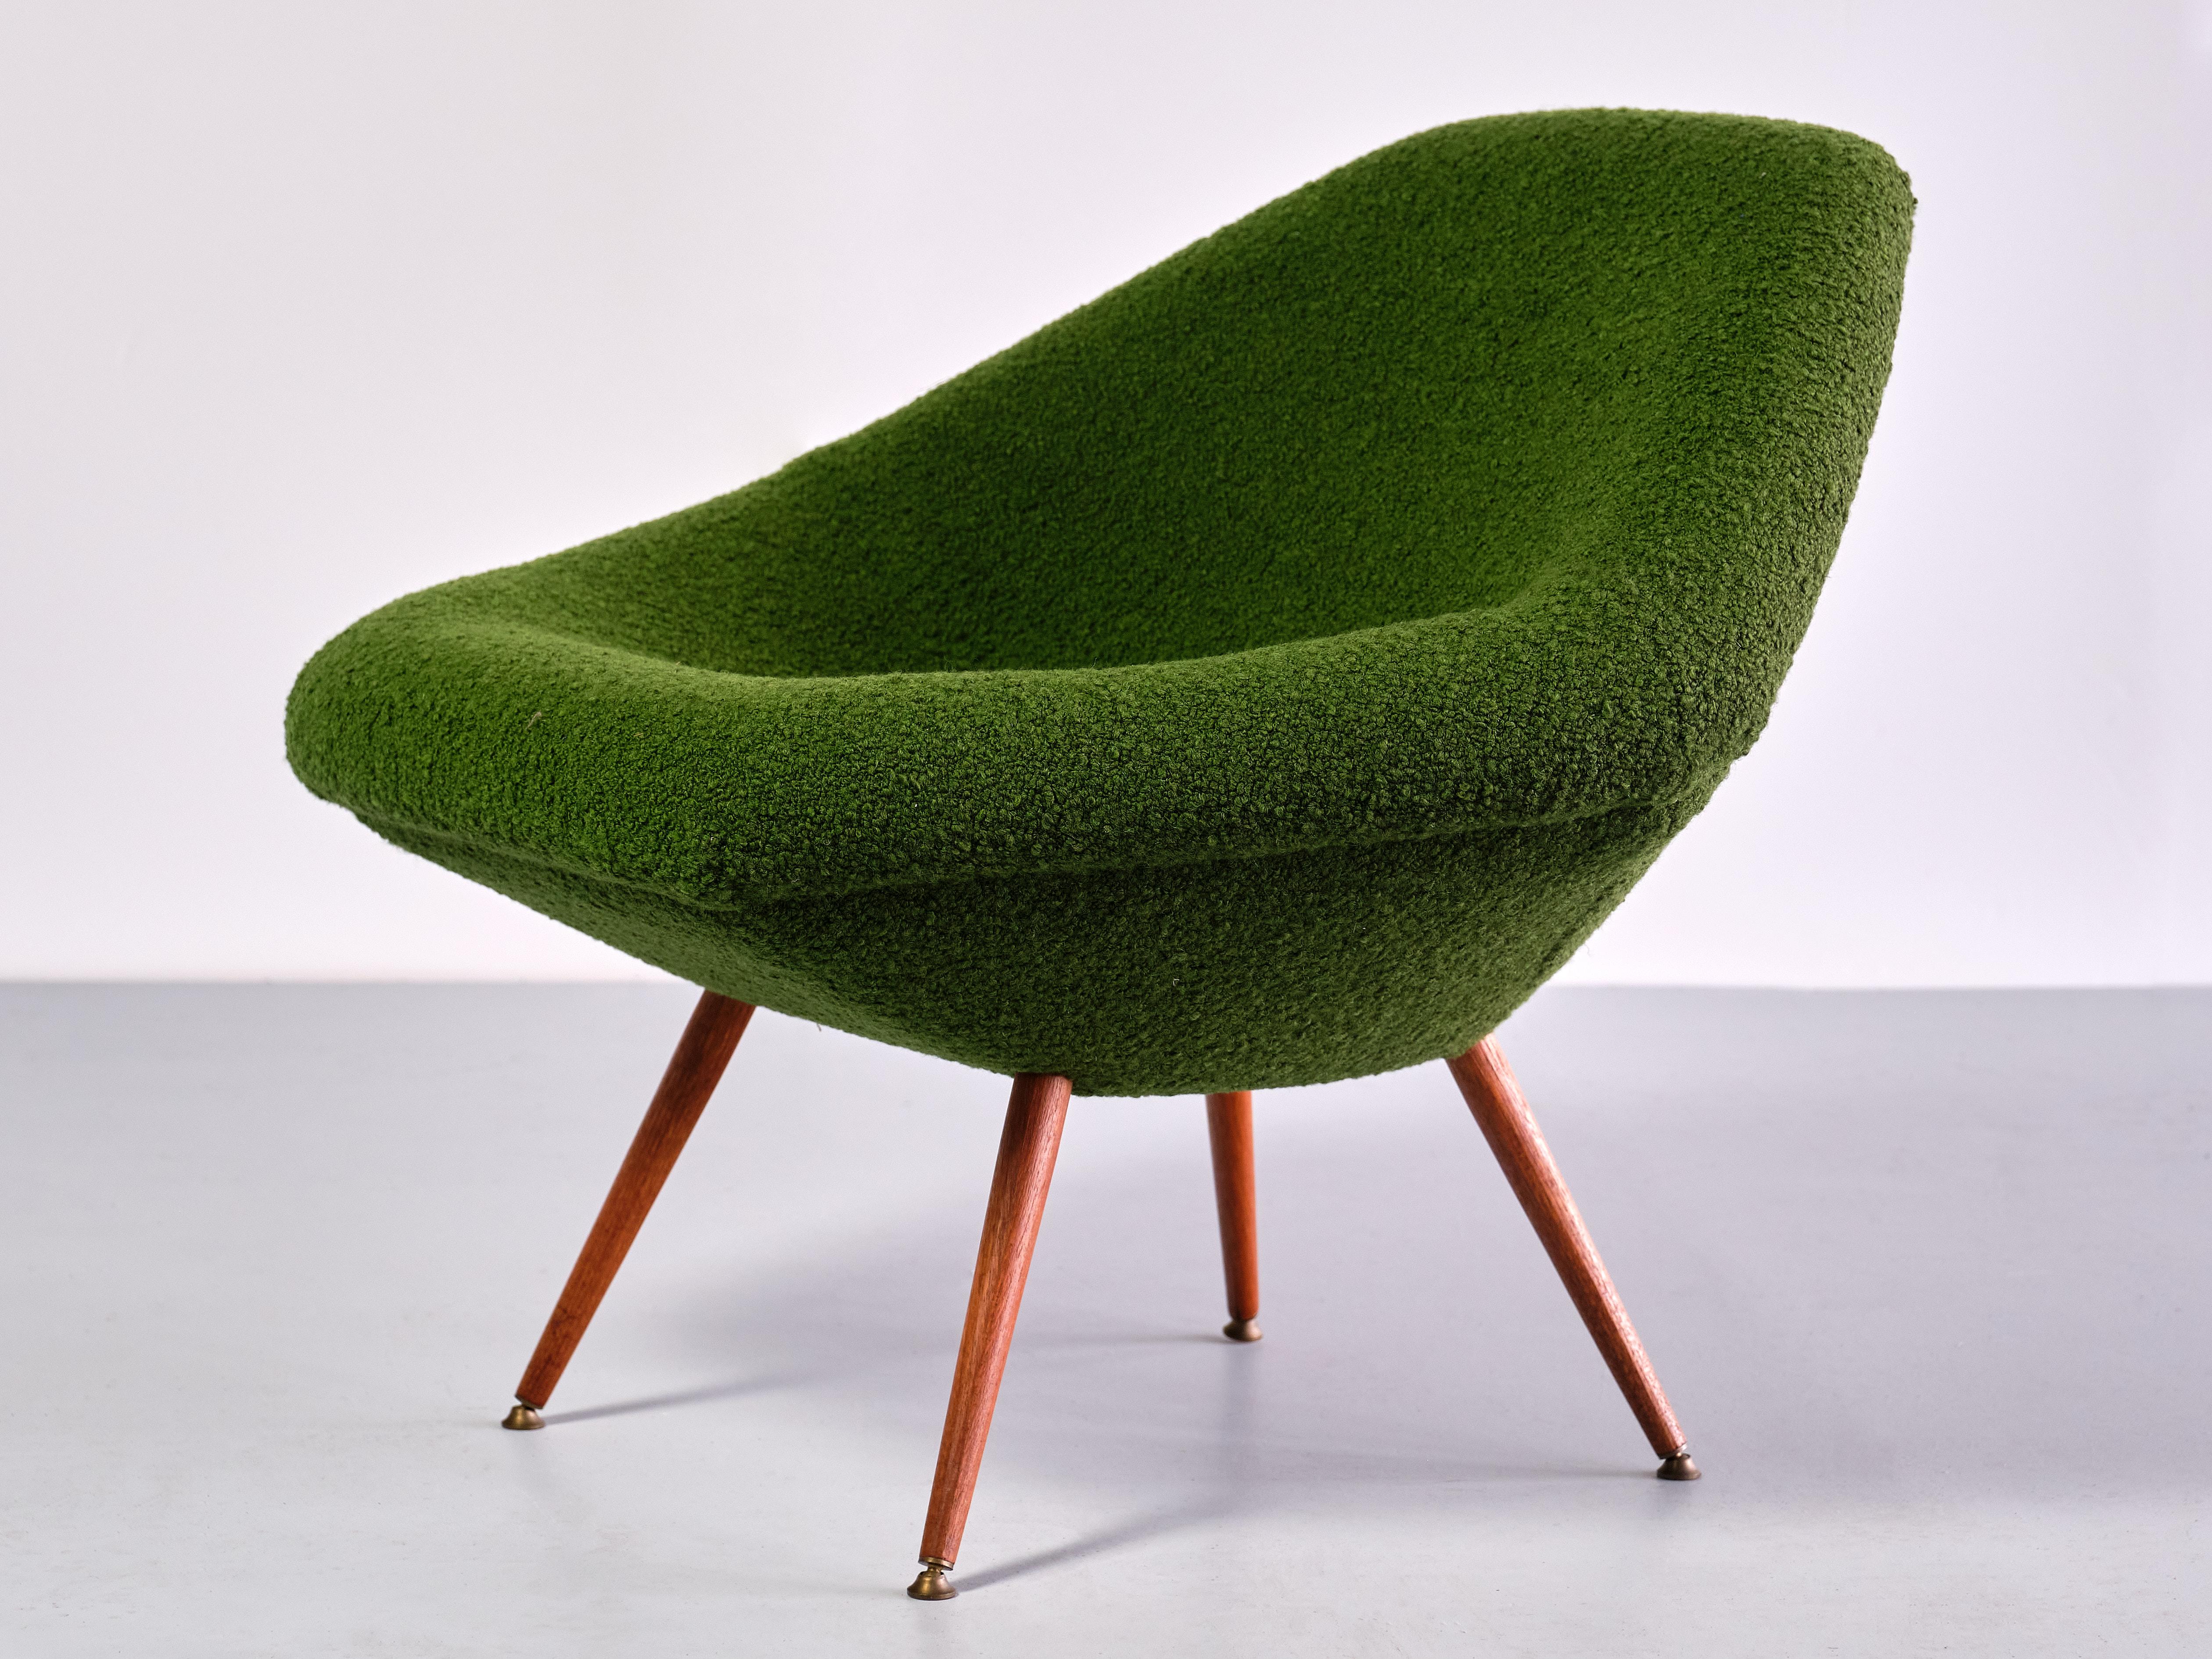 Pair of Arne Dahlén Lounge Chairs in Green Bouclé and Teak, Sweden, 1960s For Sale 4